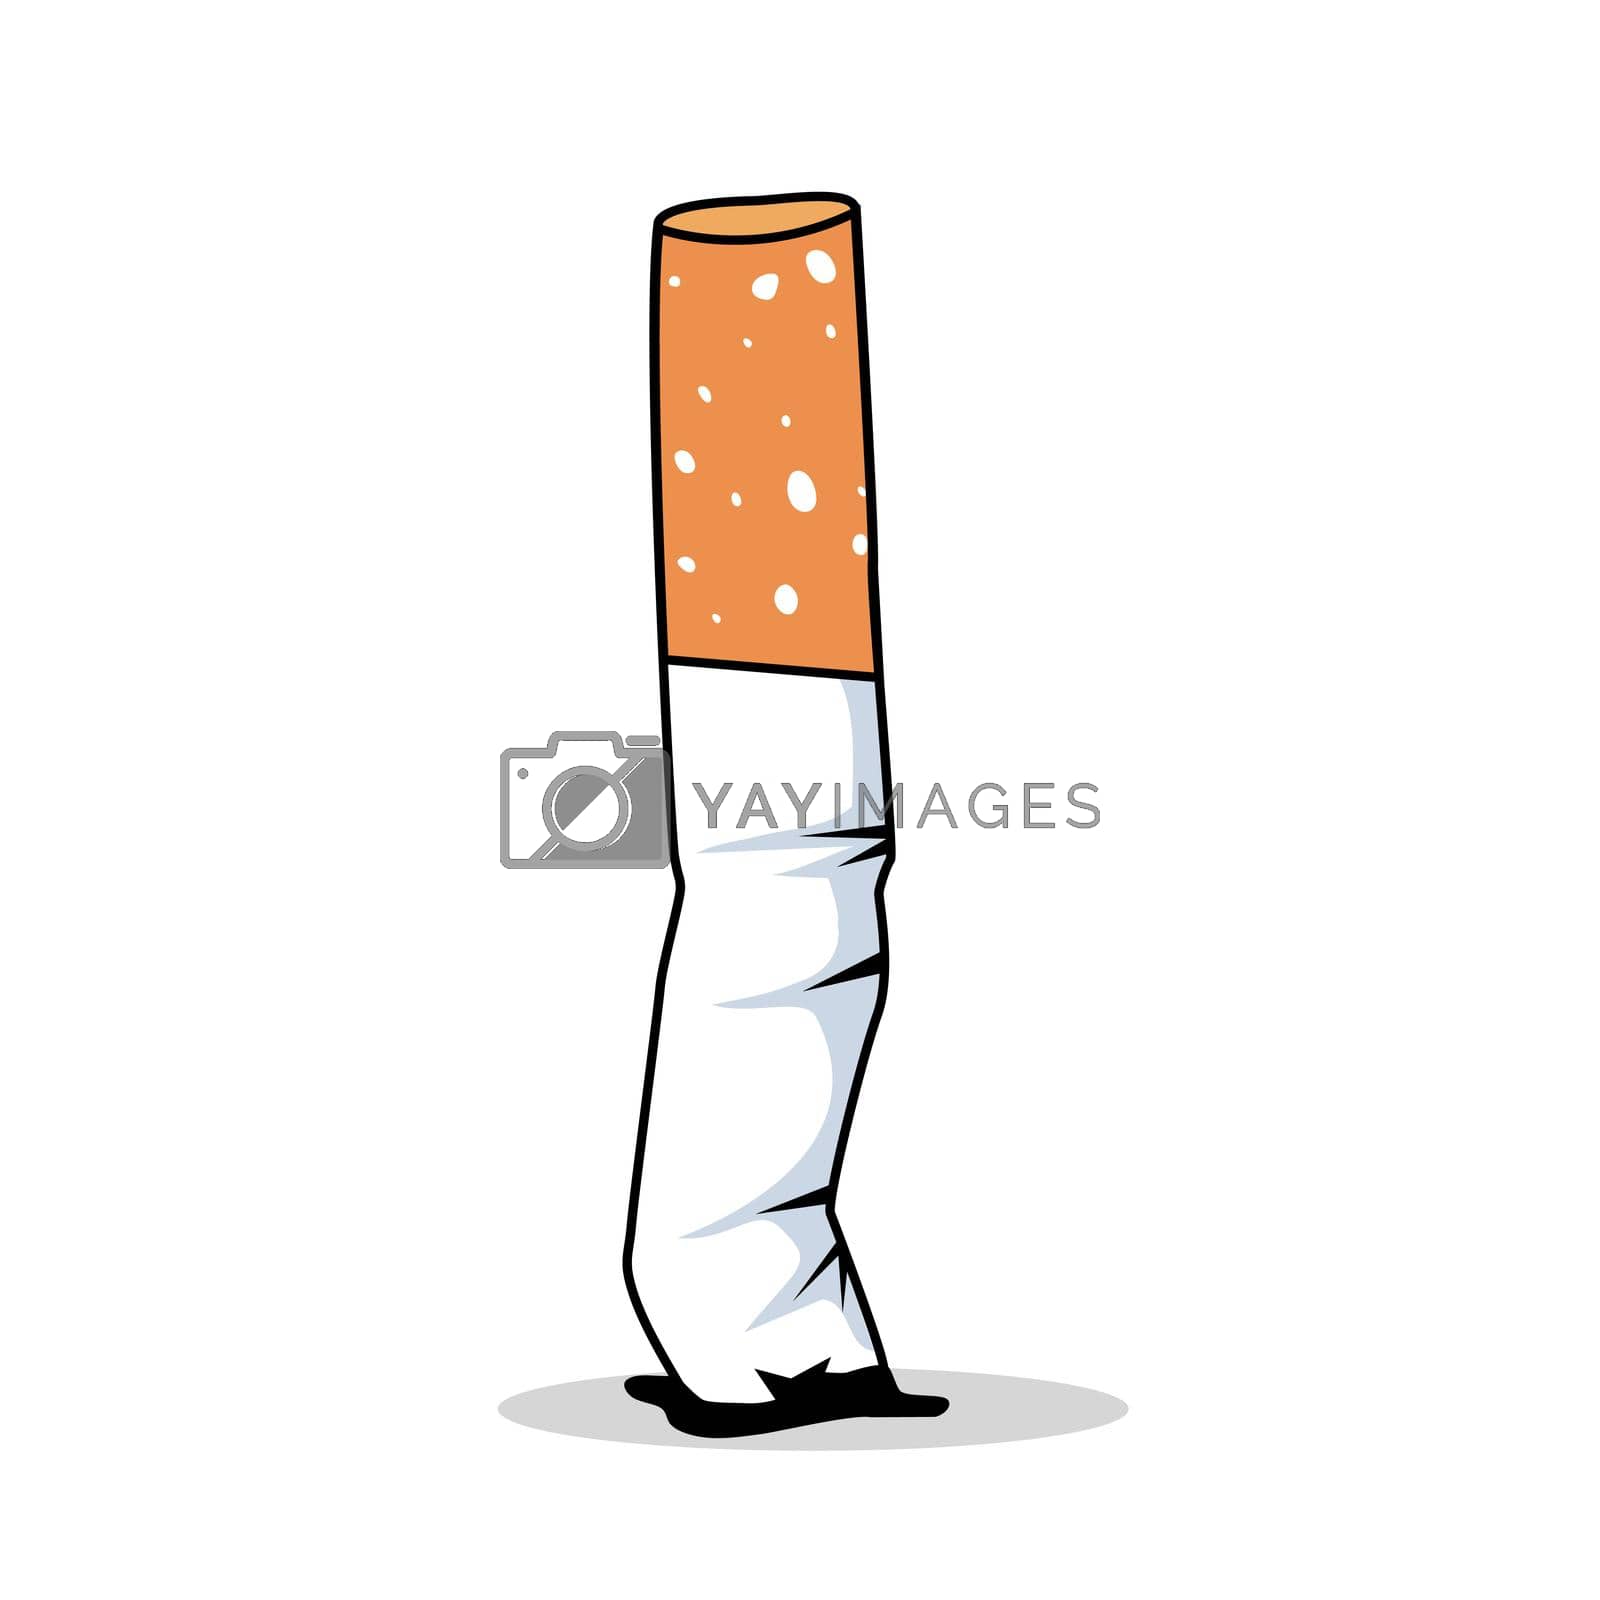 Royalty free image of Cigarette butt  isolated  vector by focus_bell